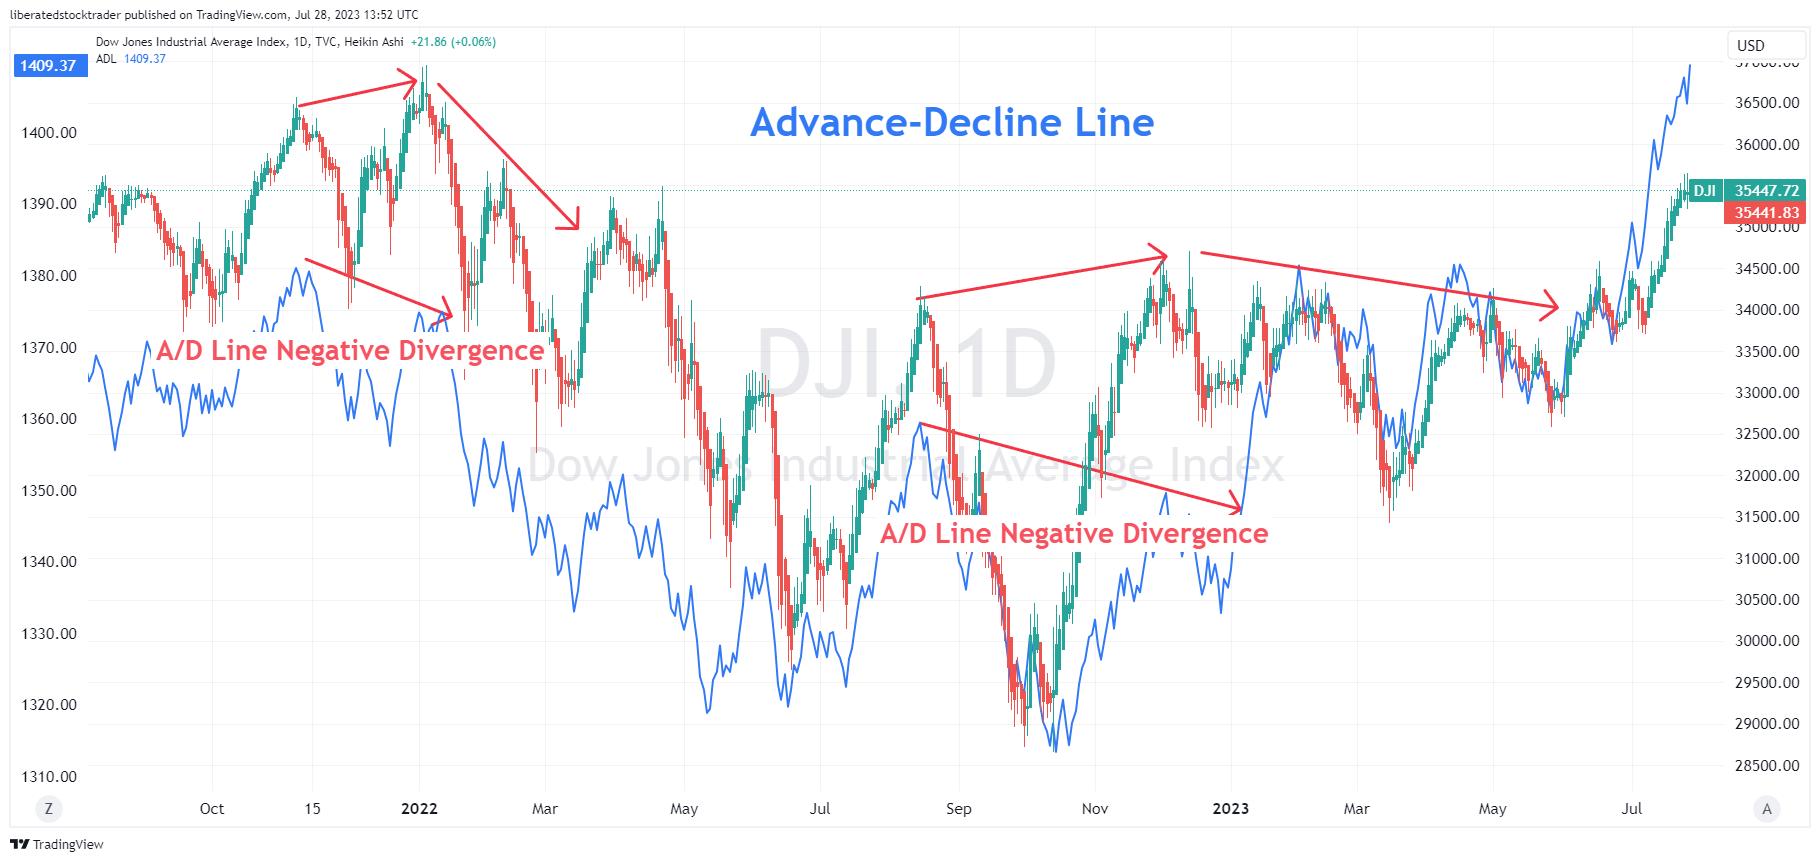 Chart: How to Use the A/D Line: Logic Behind A/D Line Divergences